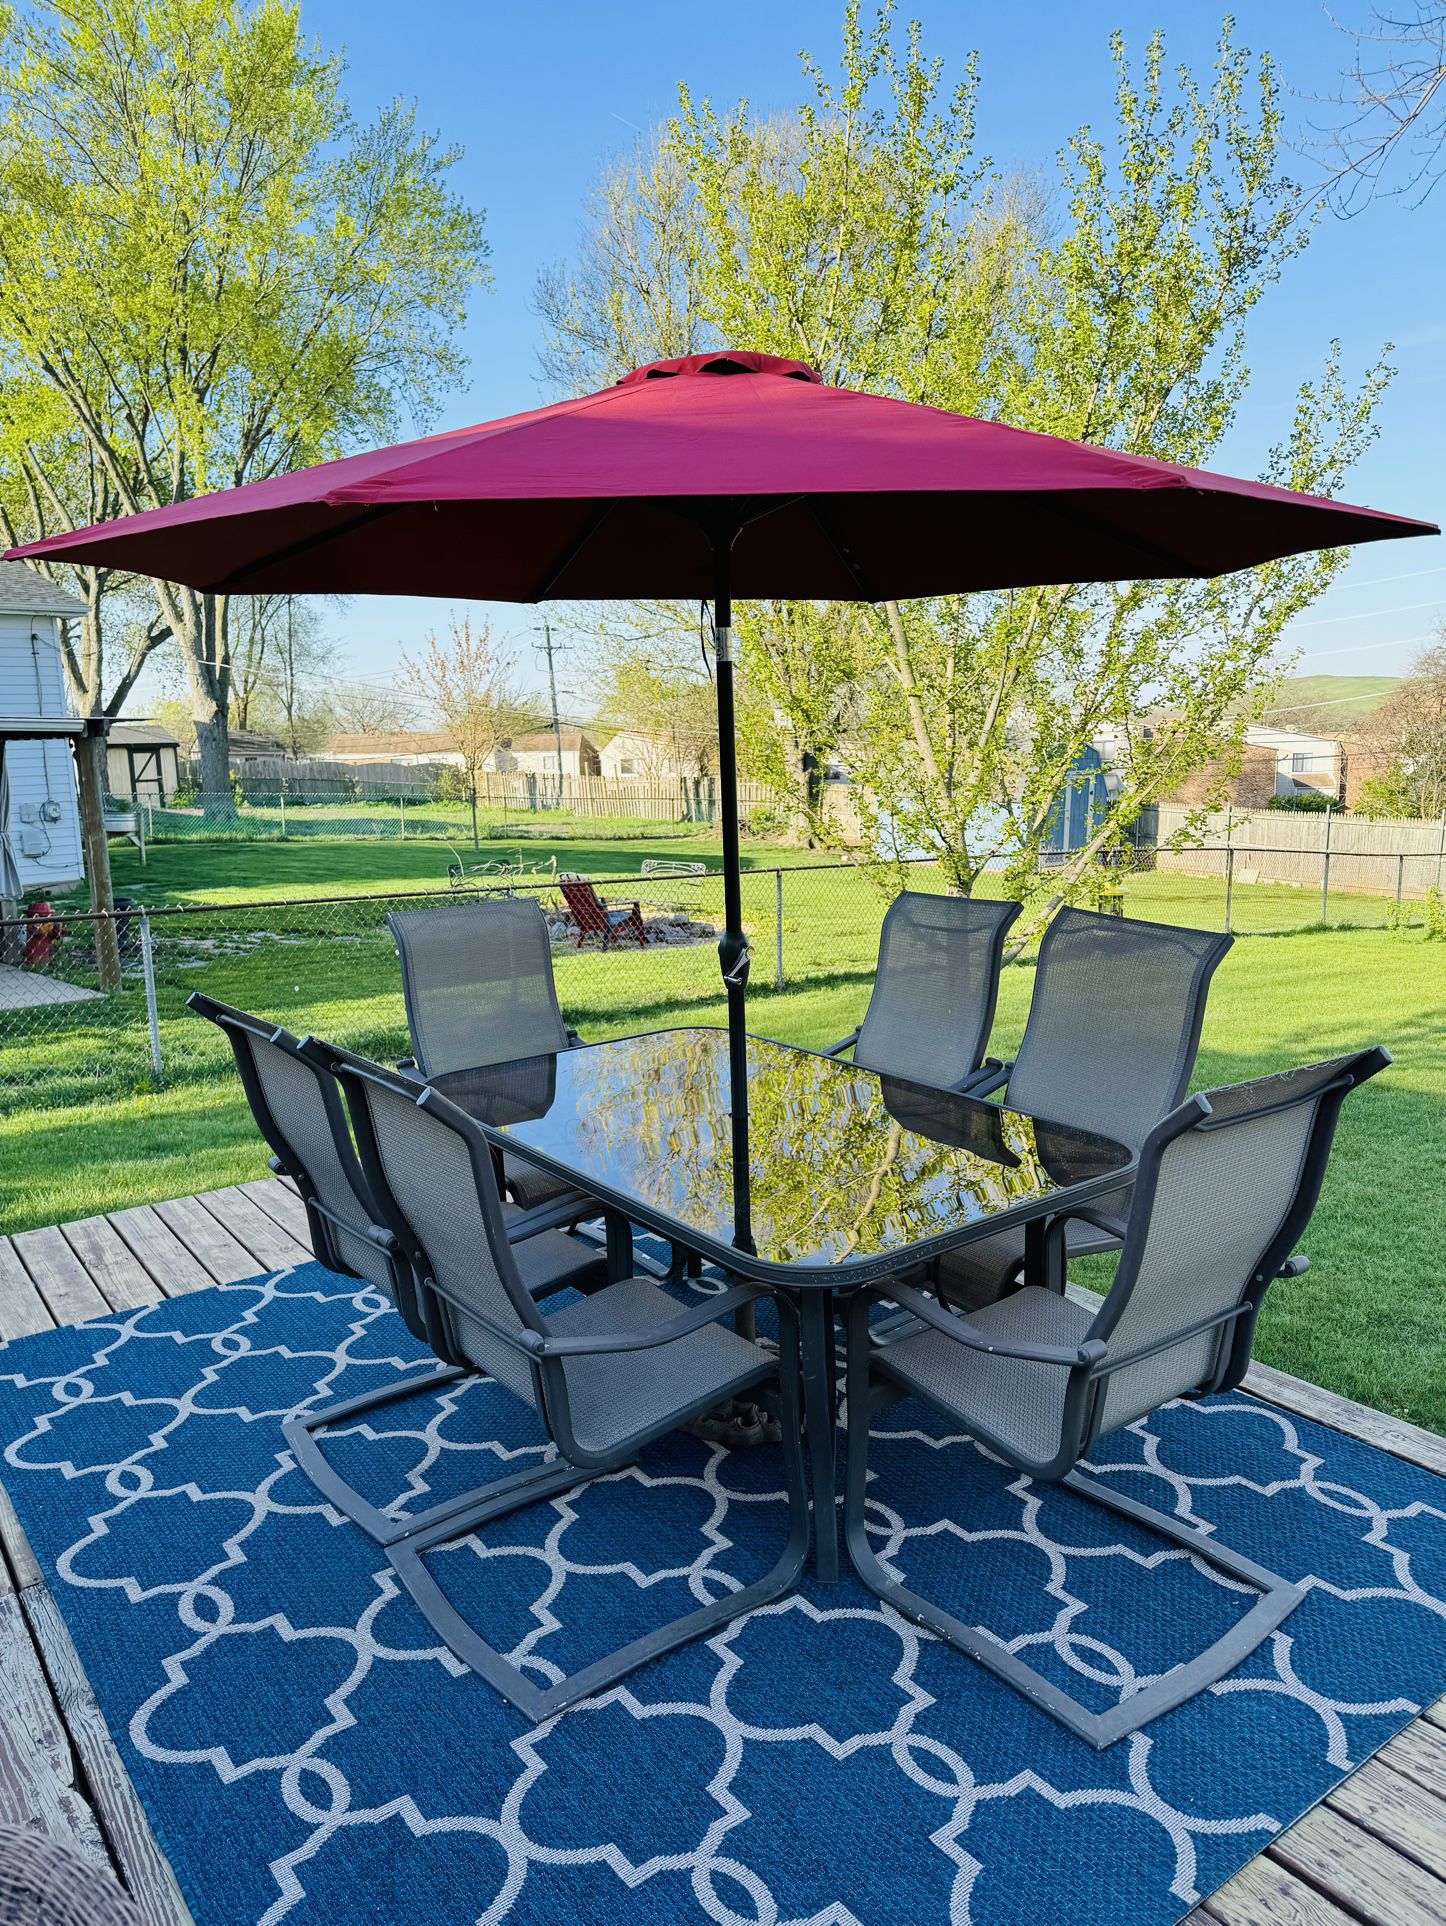 Patio Furniture - Patio Set - Outdoor Furniture - Dining Set - Chairs - 9 Piece